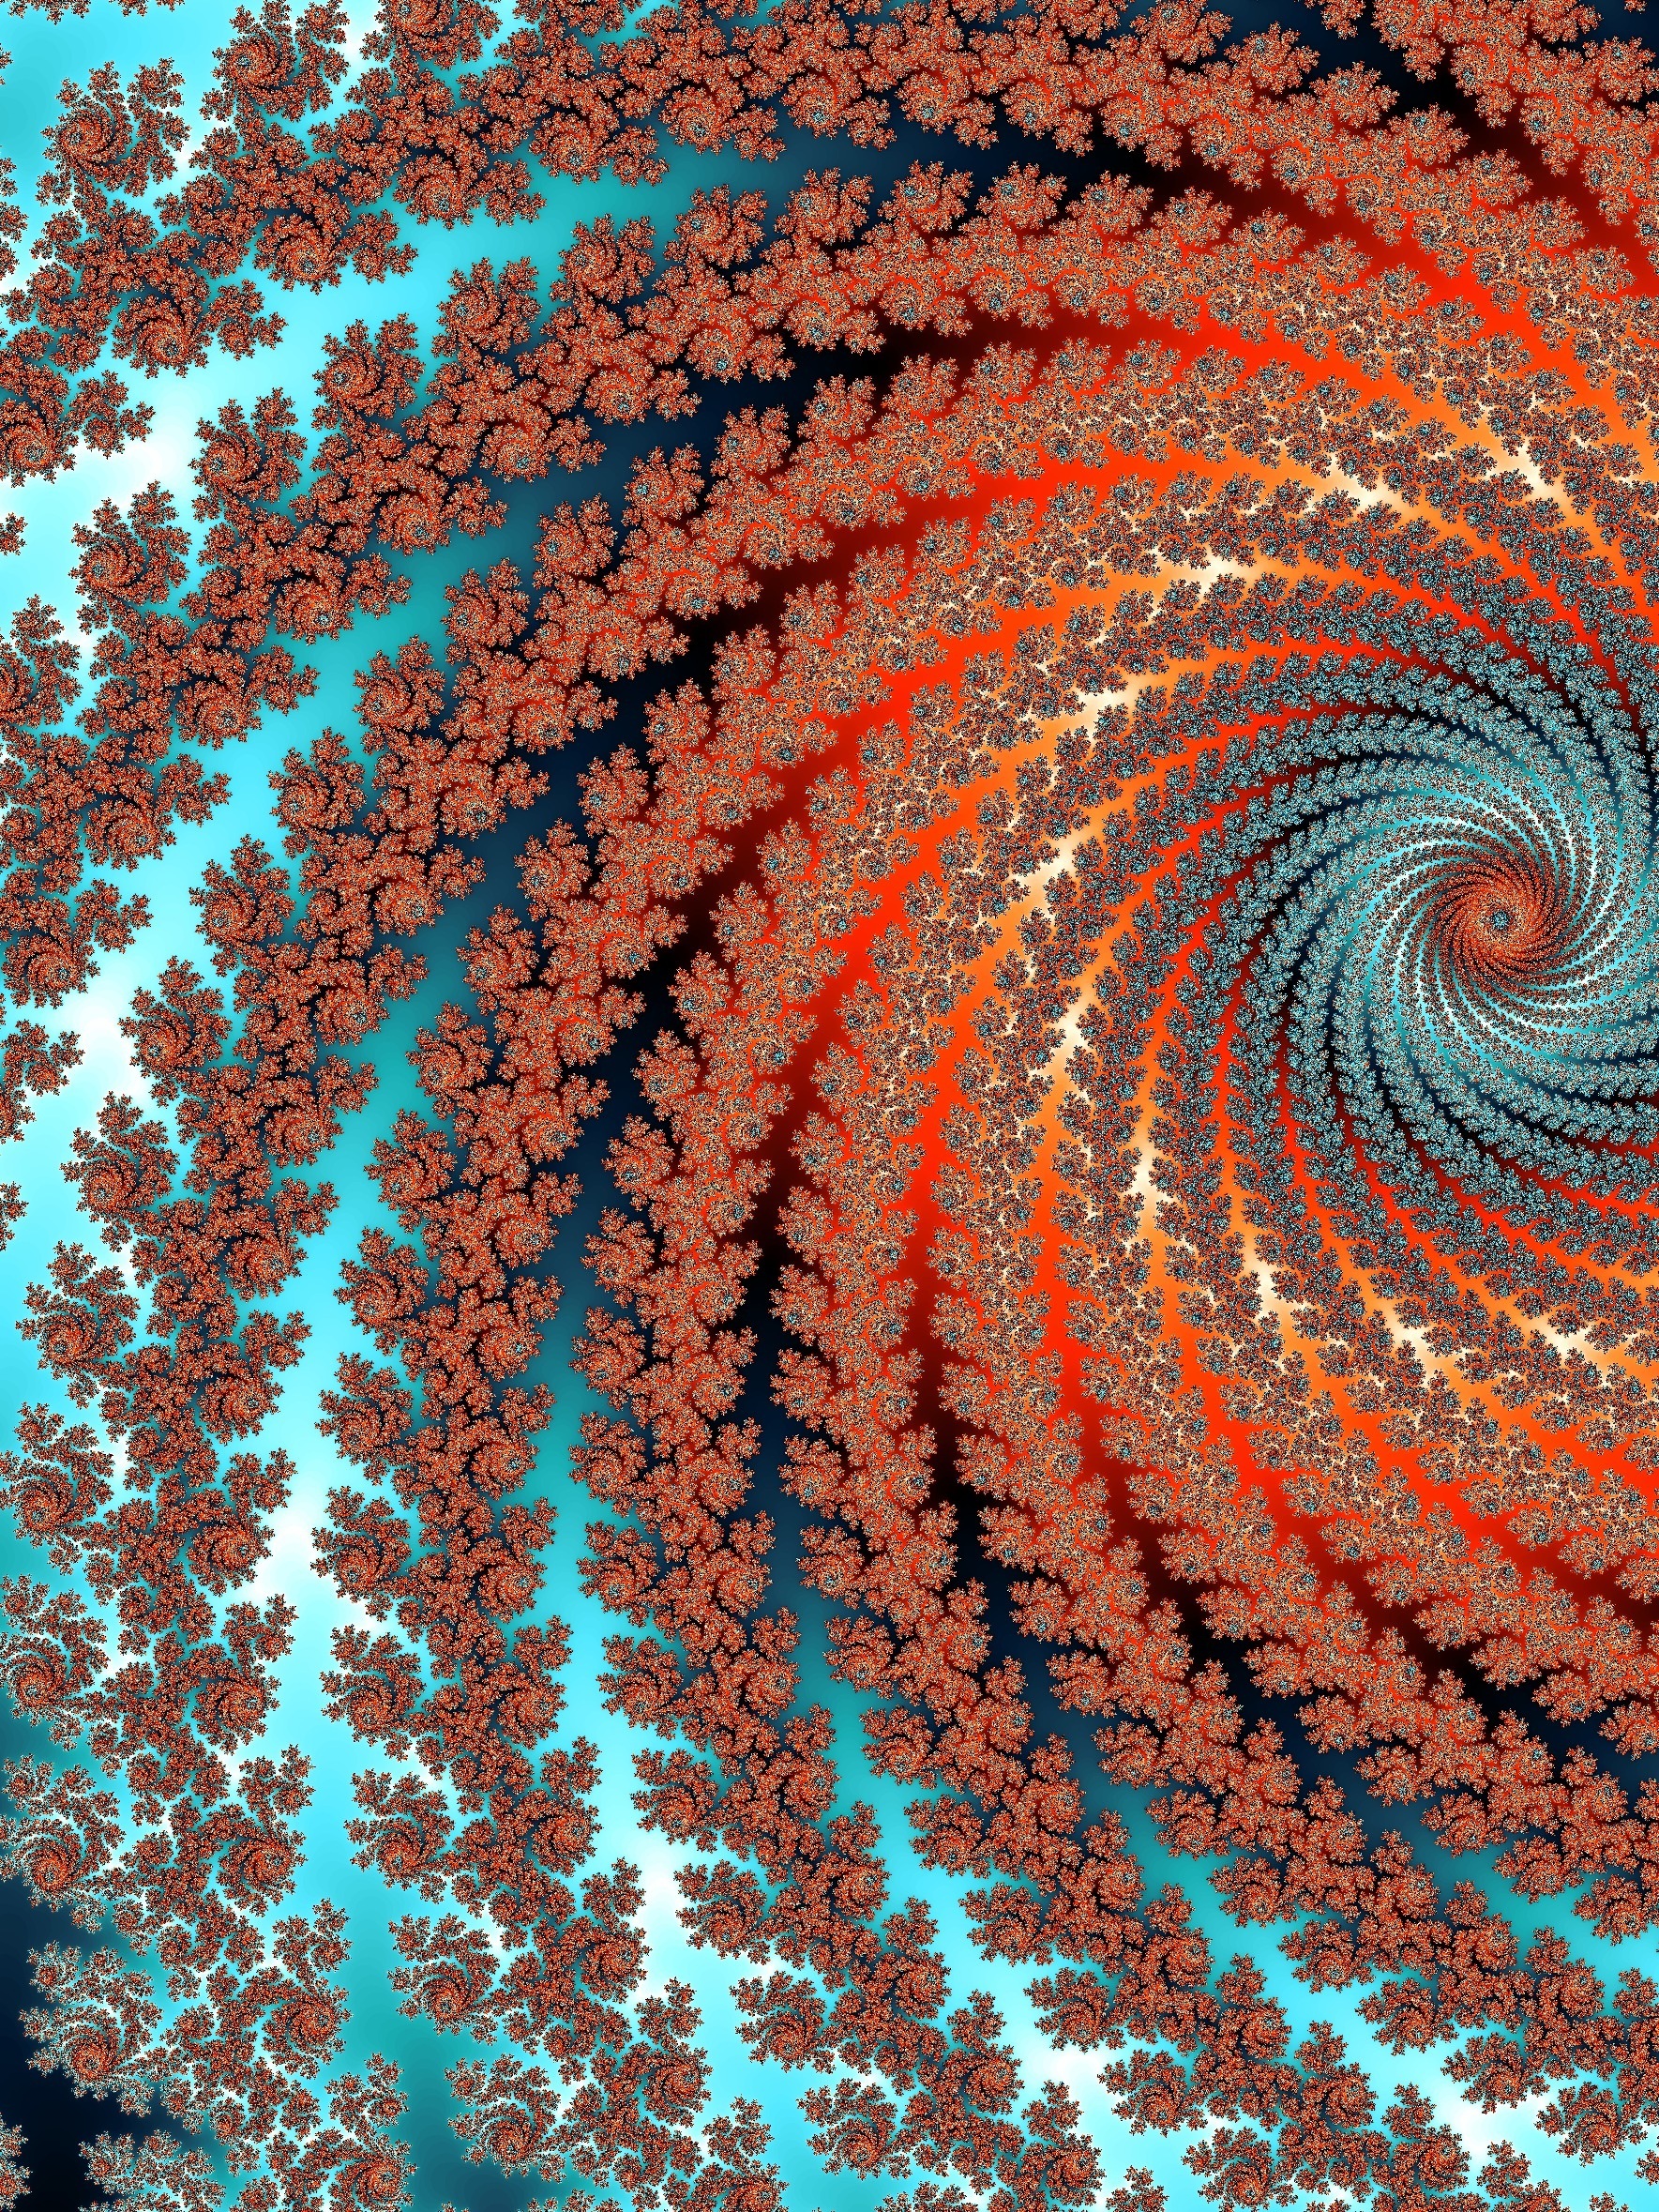 motley, abstract, multicolored, fractal, funnel, swirling, involute, digital